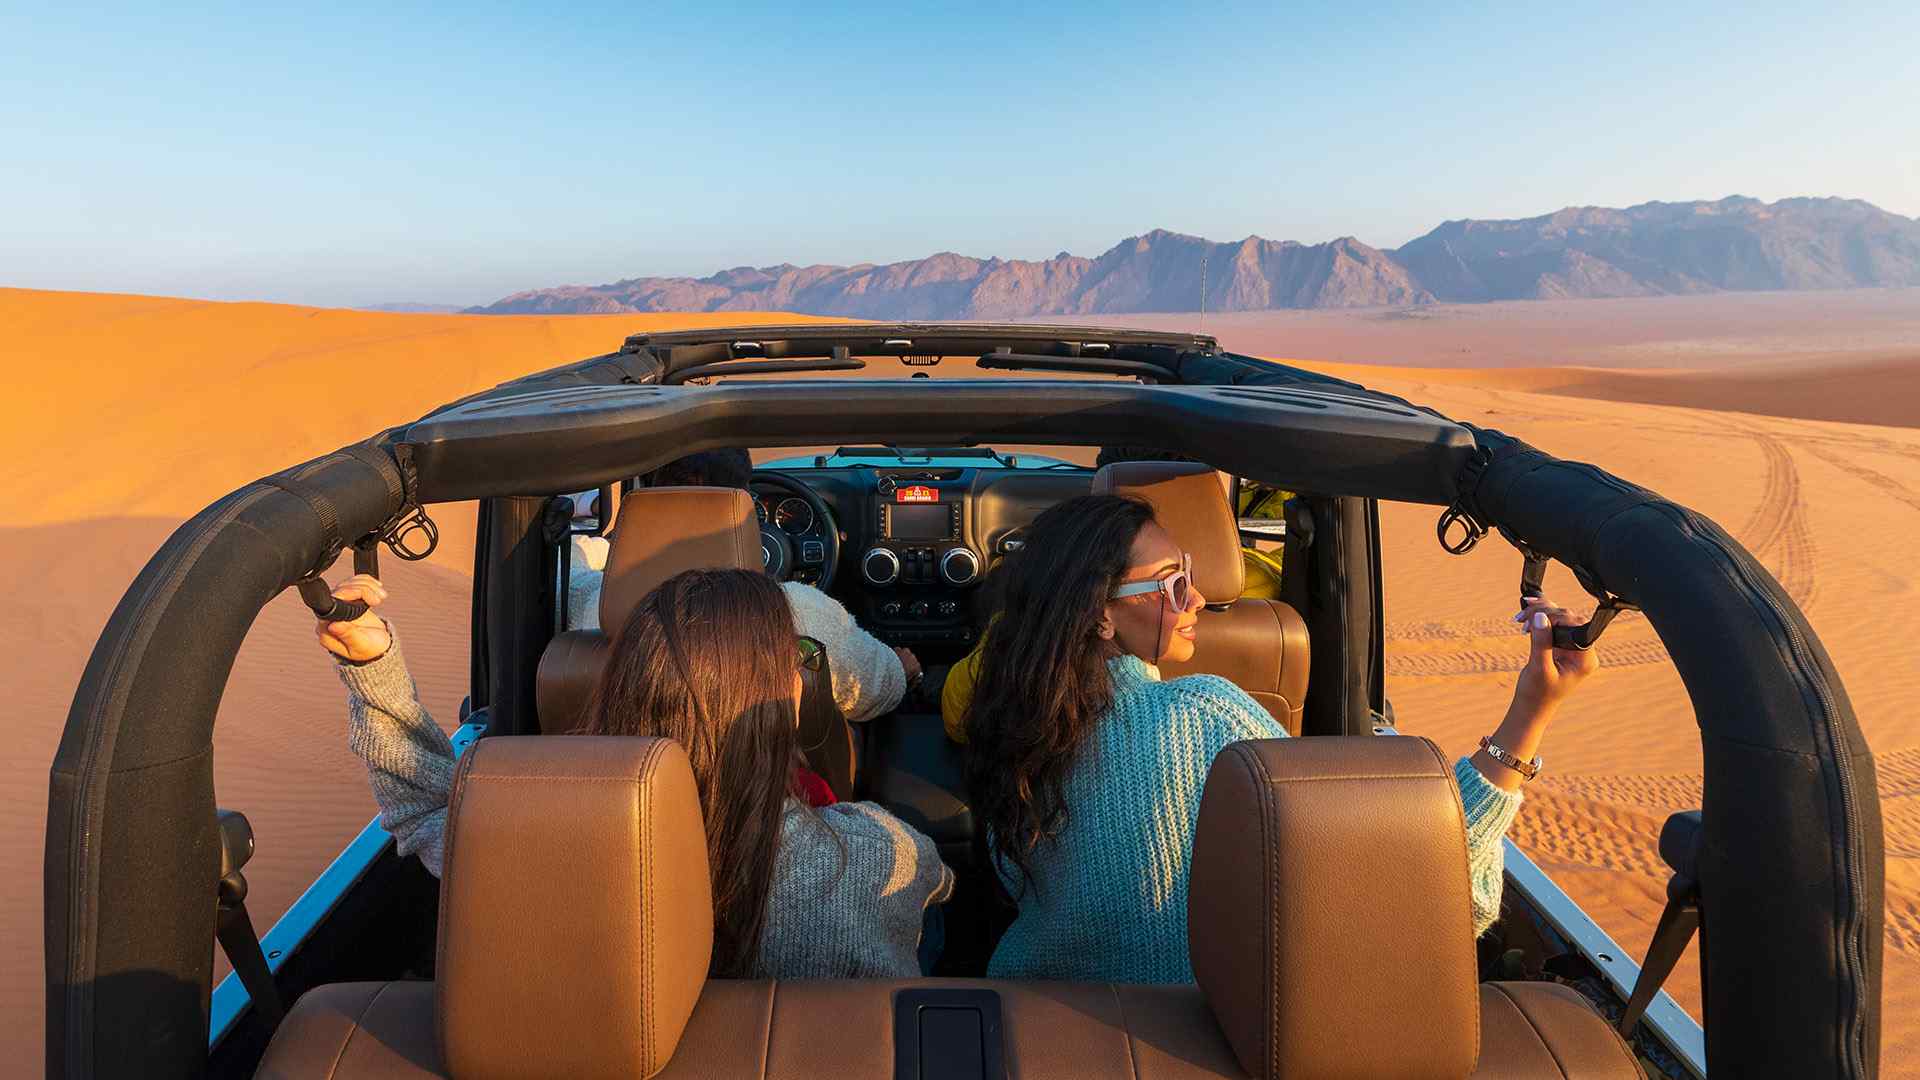 Dune bashing is like a rollercoaster on sand—fast, bumpy, and oh-so-exciting.